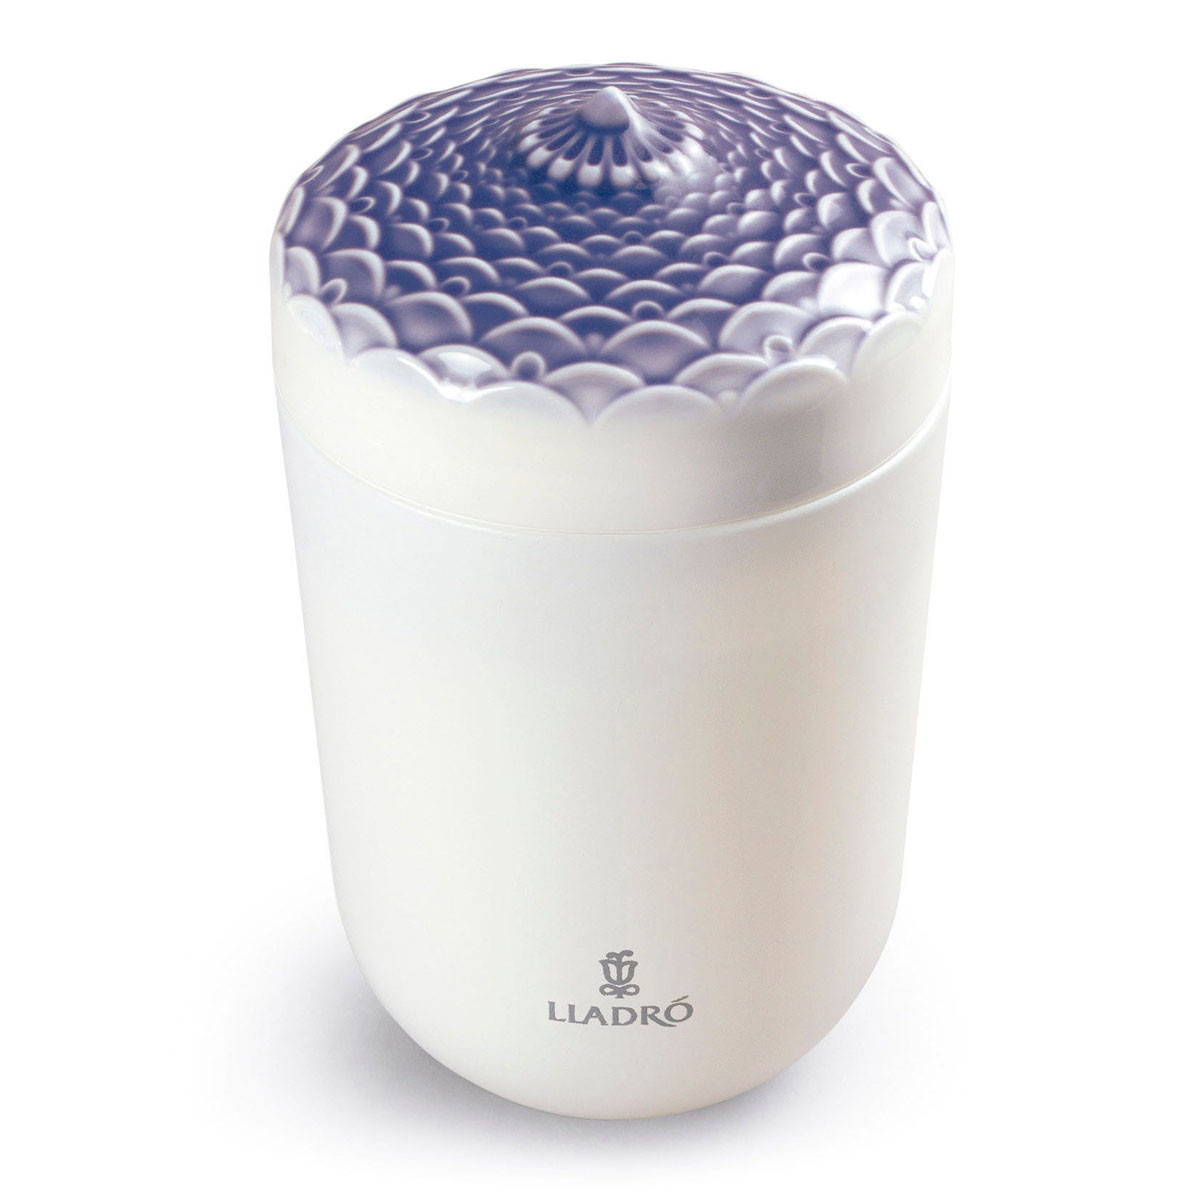 Lladro Light And Fragrance, Echoes Of Nature Candle. A Secret Orient Scent